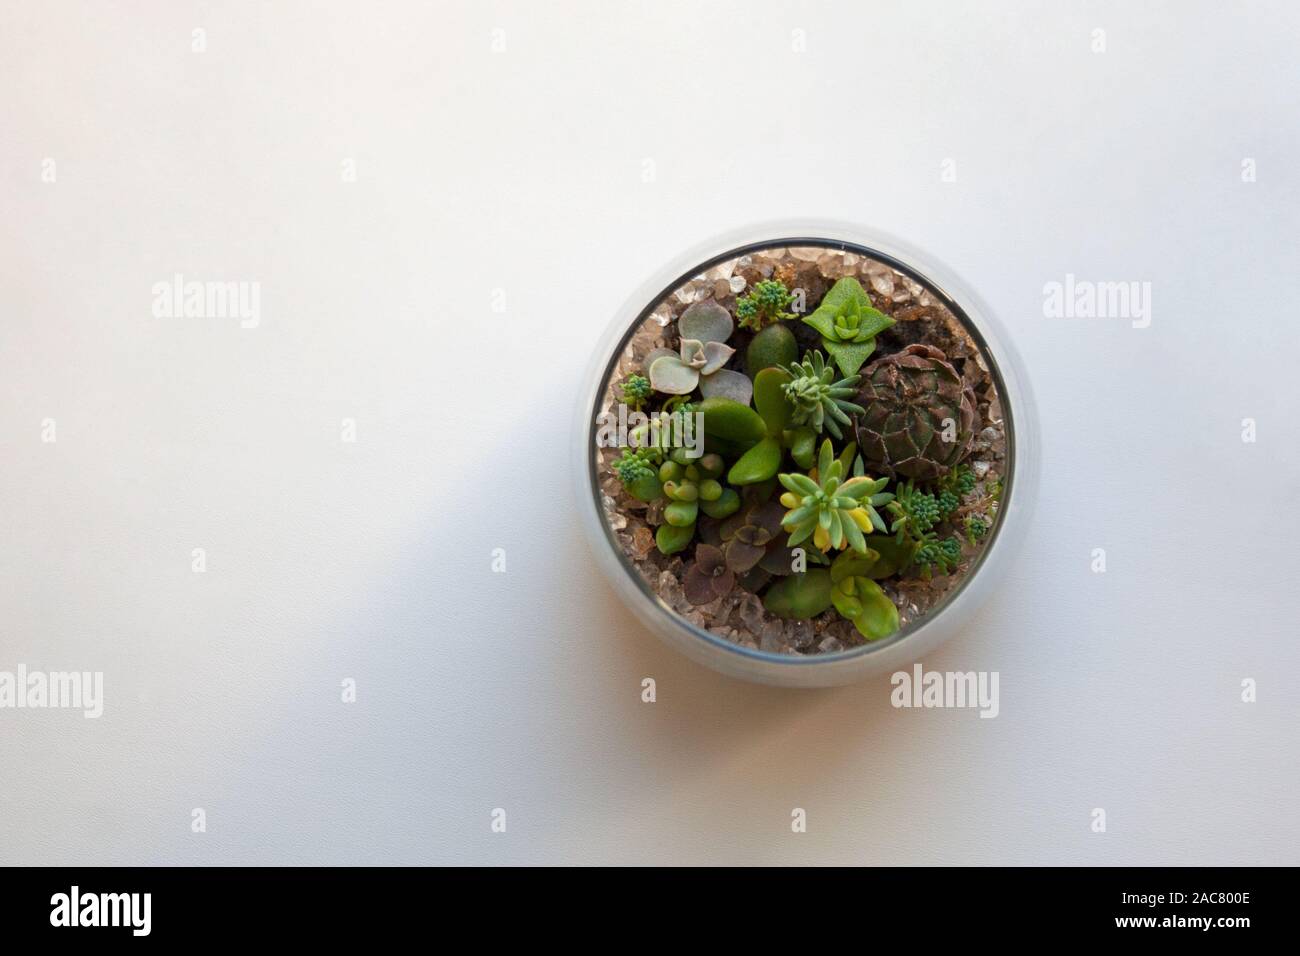 Small succulent plants garden in transparent glass terrarium isolated on white background from a high angle view Stock Photo